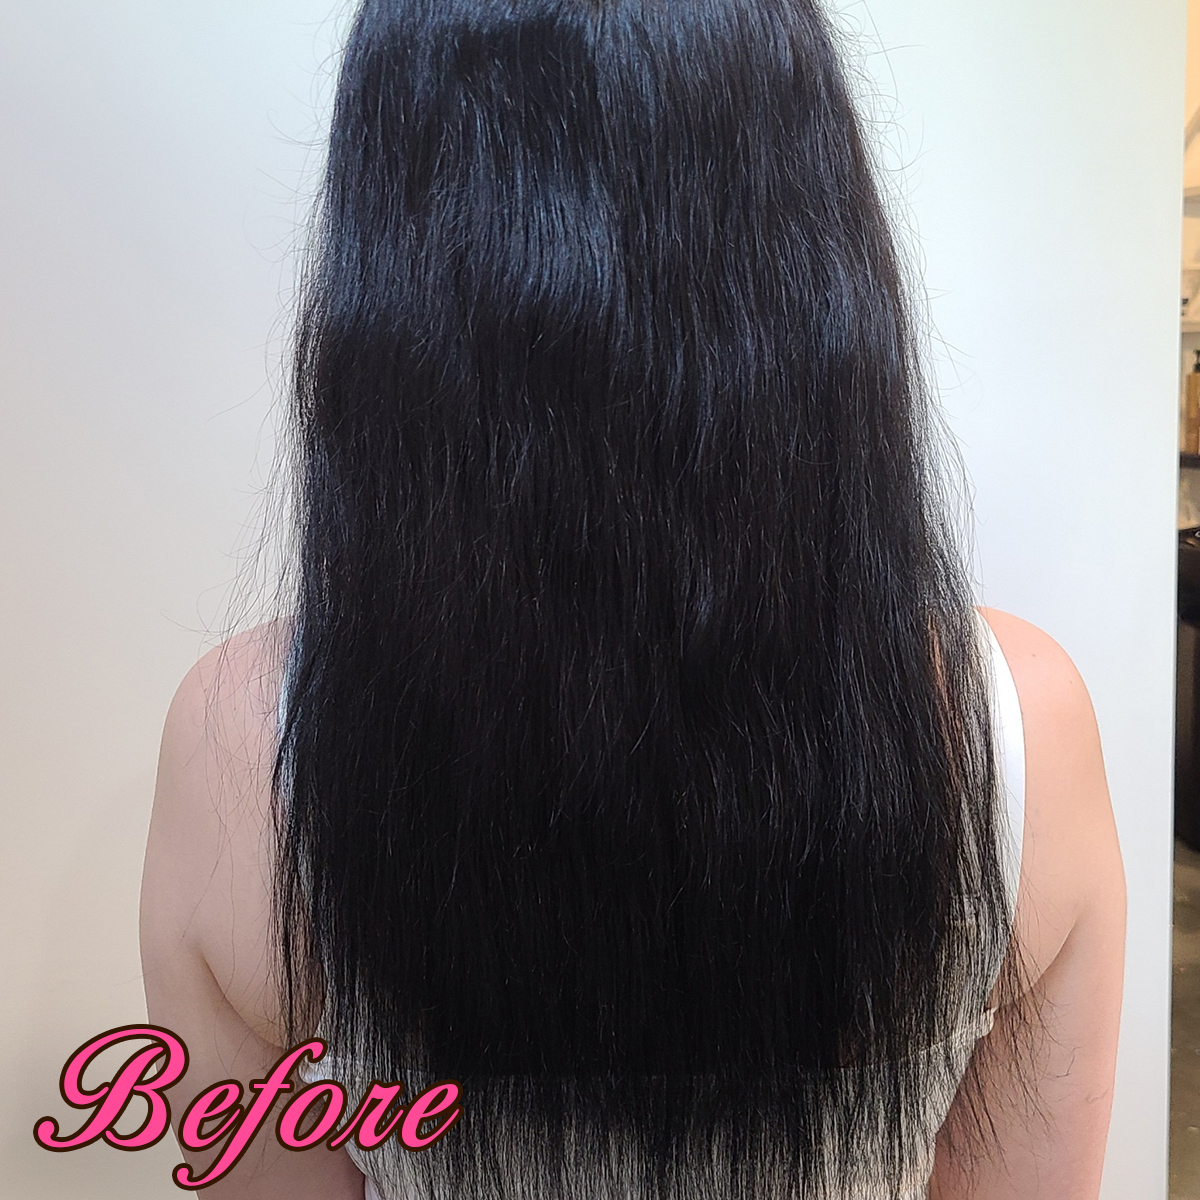 Gallery Before 102- Hair Extensions by Gricelda